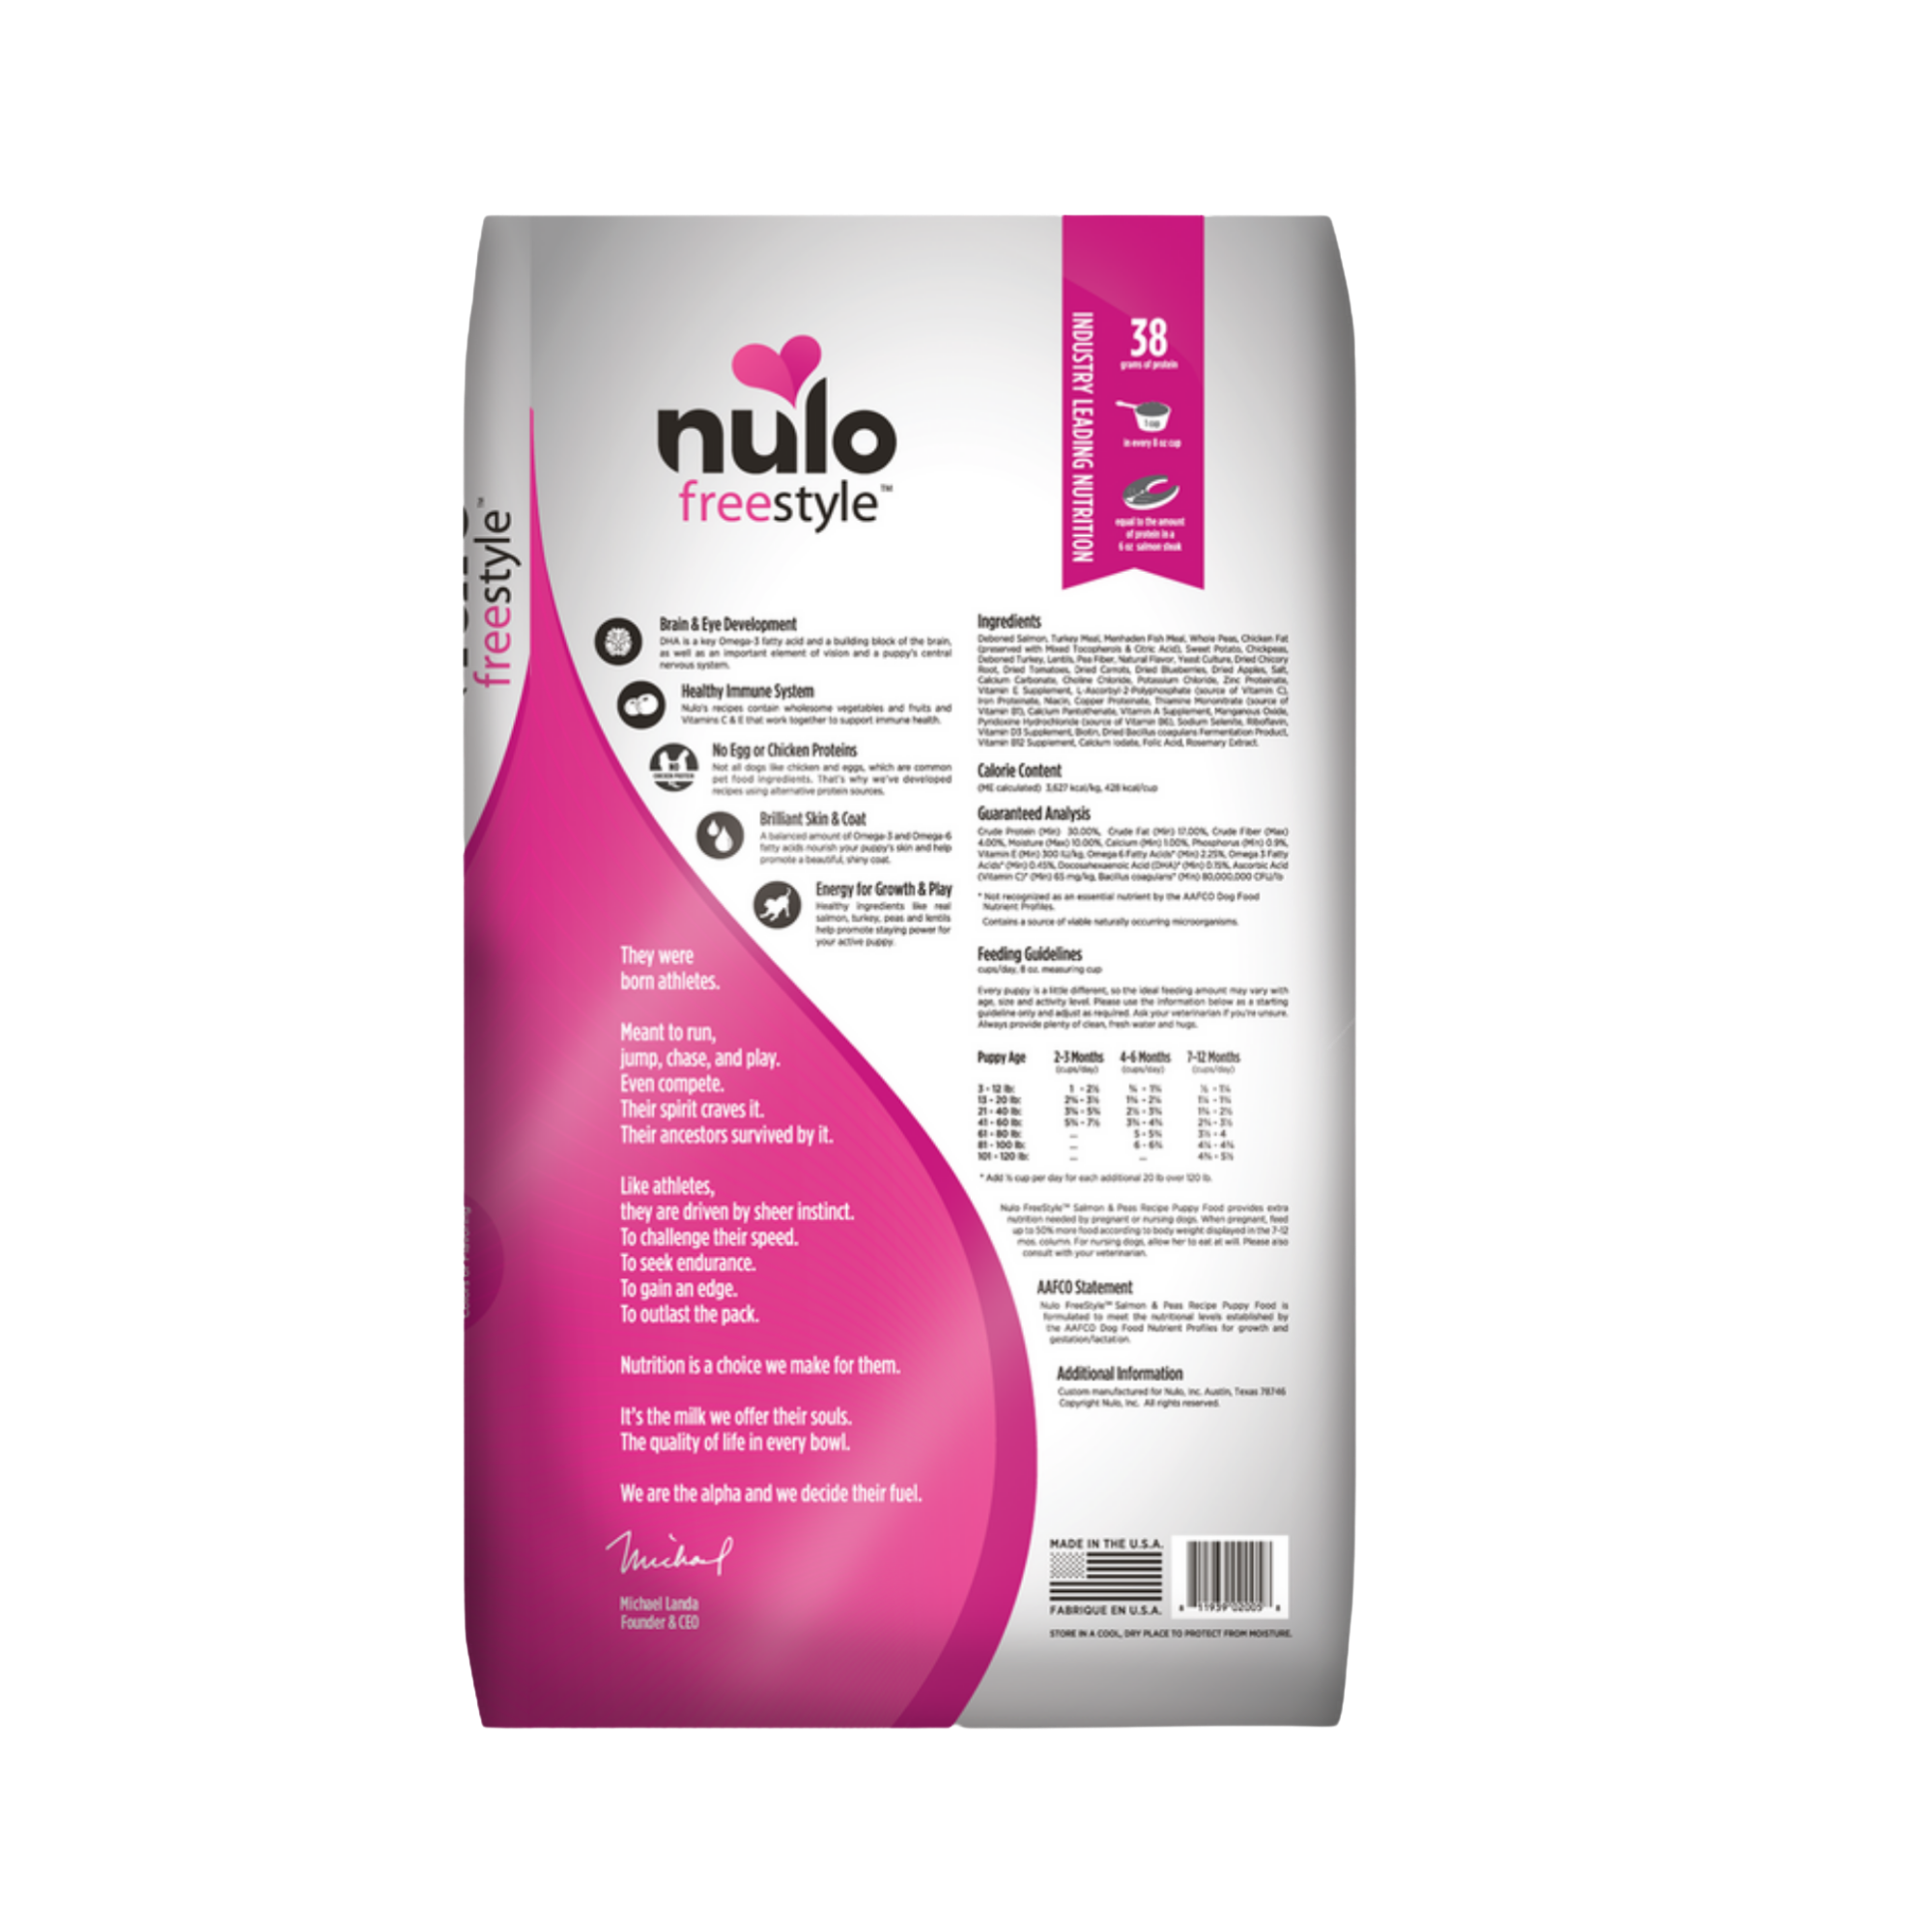 Nulo Freestyle Grain-Free Puppy Salmon & Peas Recipe Dry Dog Food - Mutts & Co.